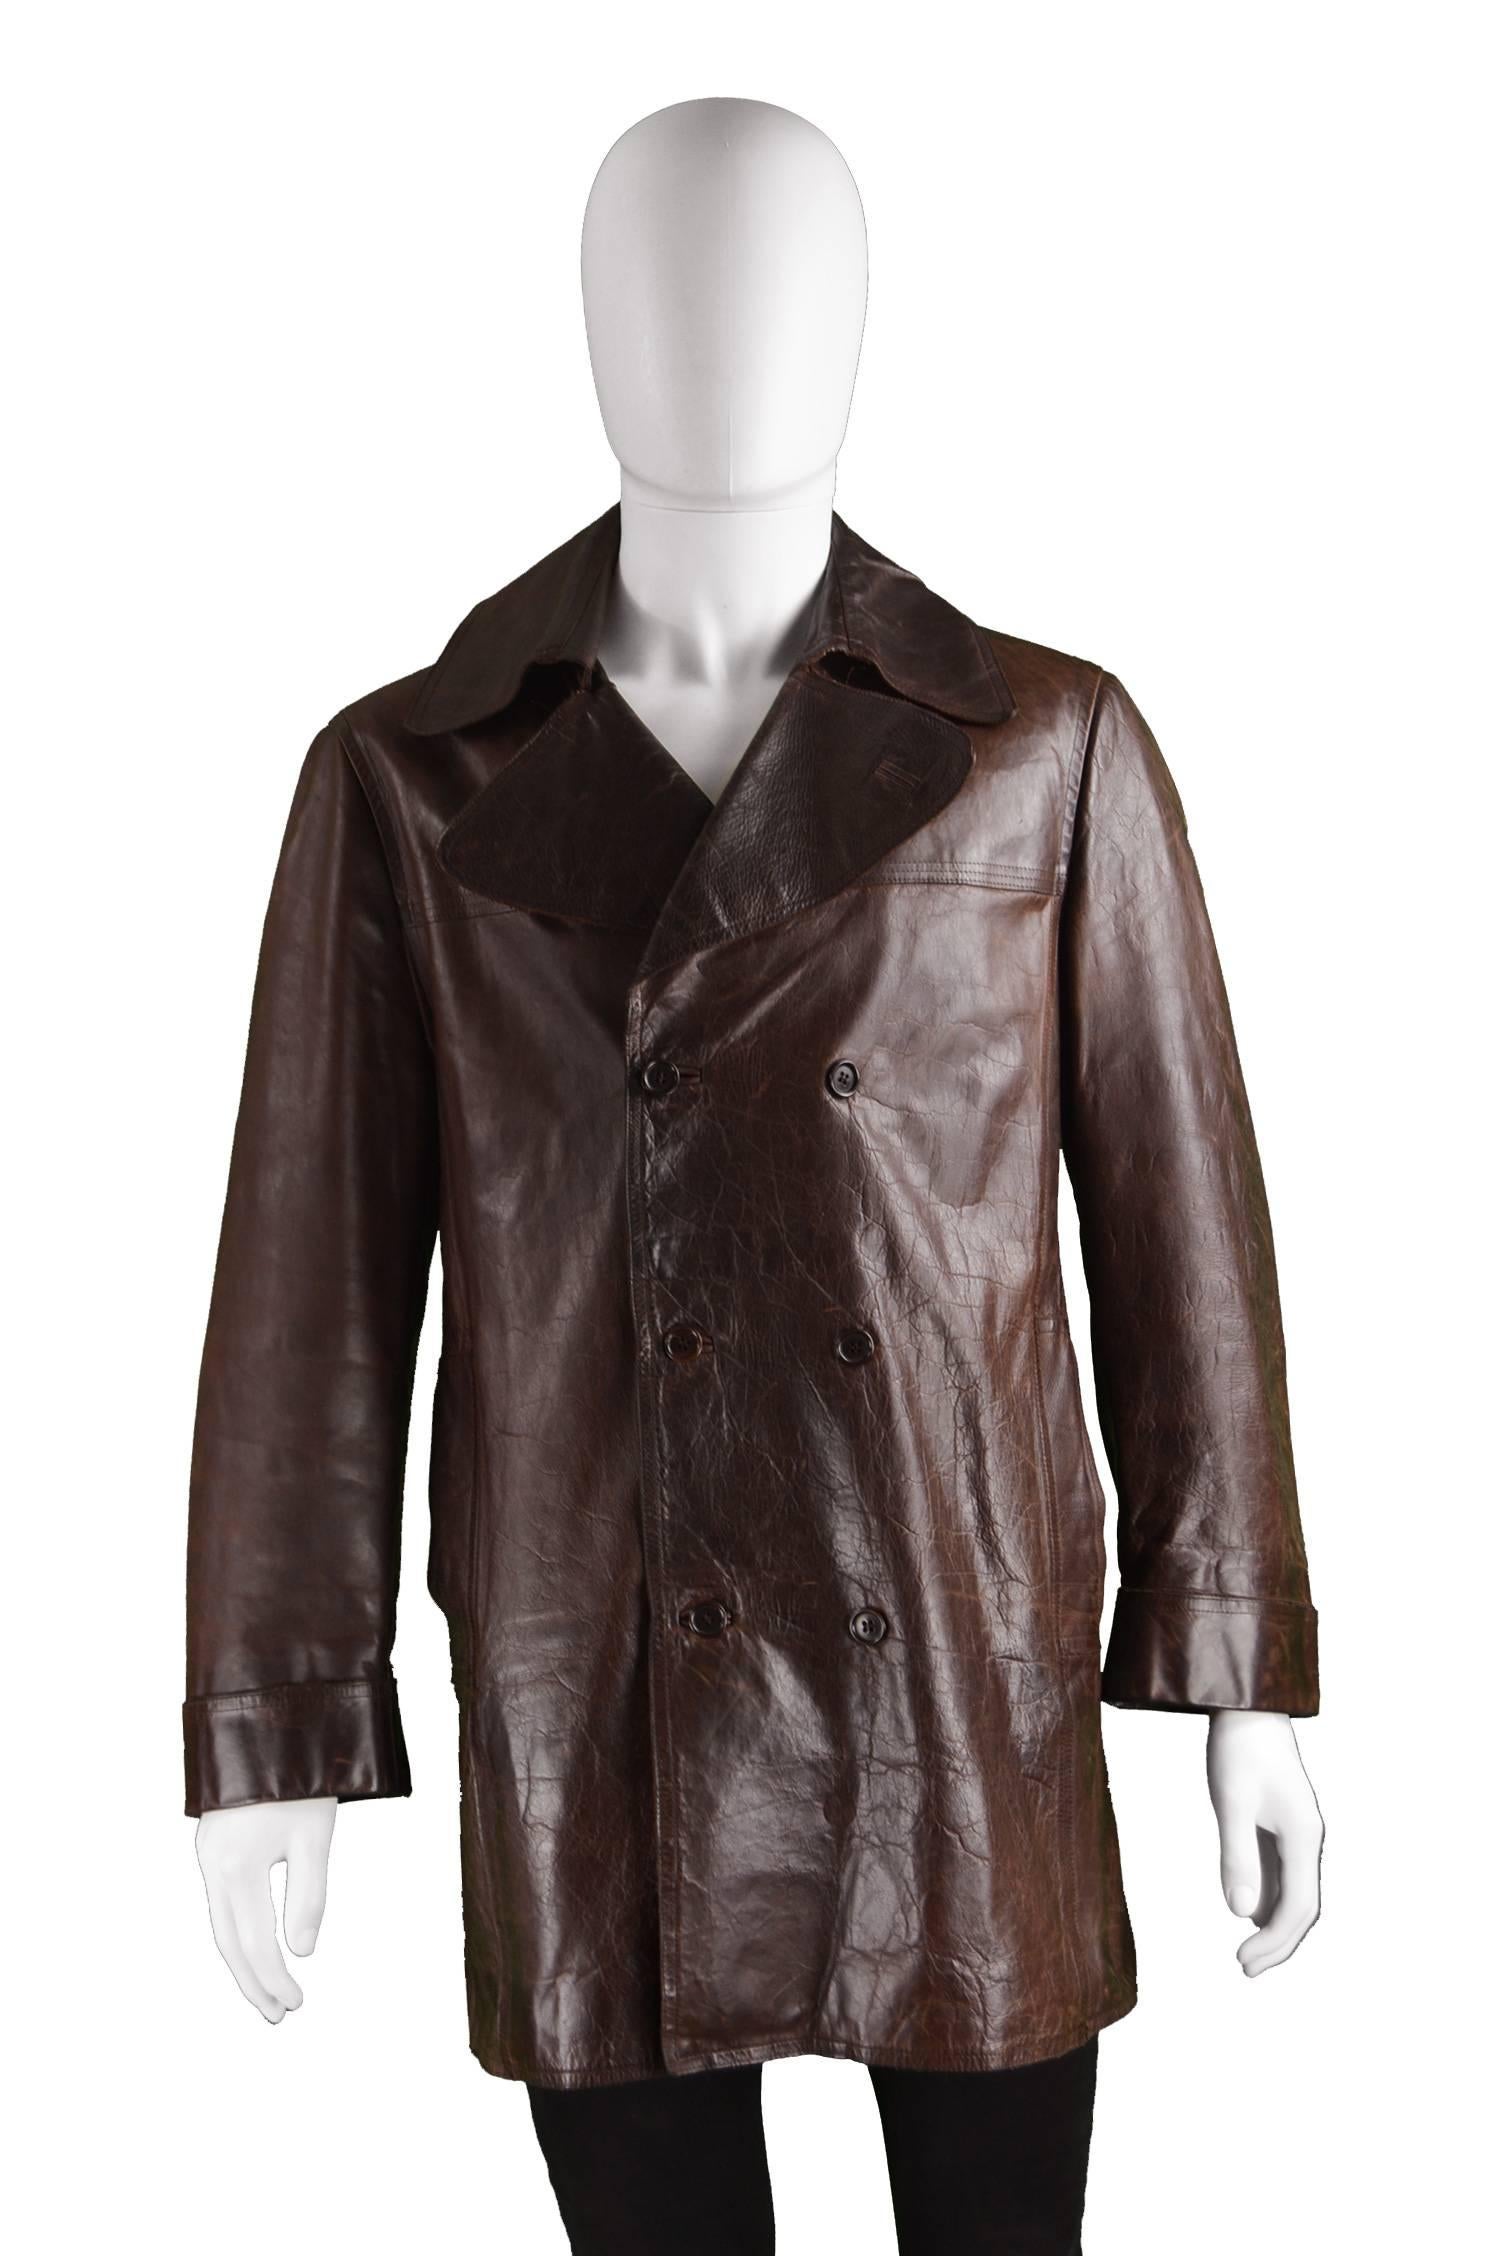 Costume National Homme Brown Italian Leather Mens Leather Peacoat

Please Click +CONTINUE READING to see measurements, description and condition. 

Size: Marked 48 which equates to a Men's Small. Check measurements to ensure fit. 
Chest - 42” /